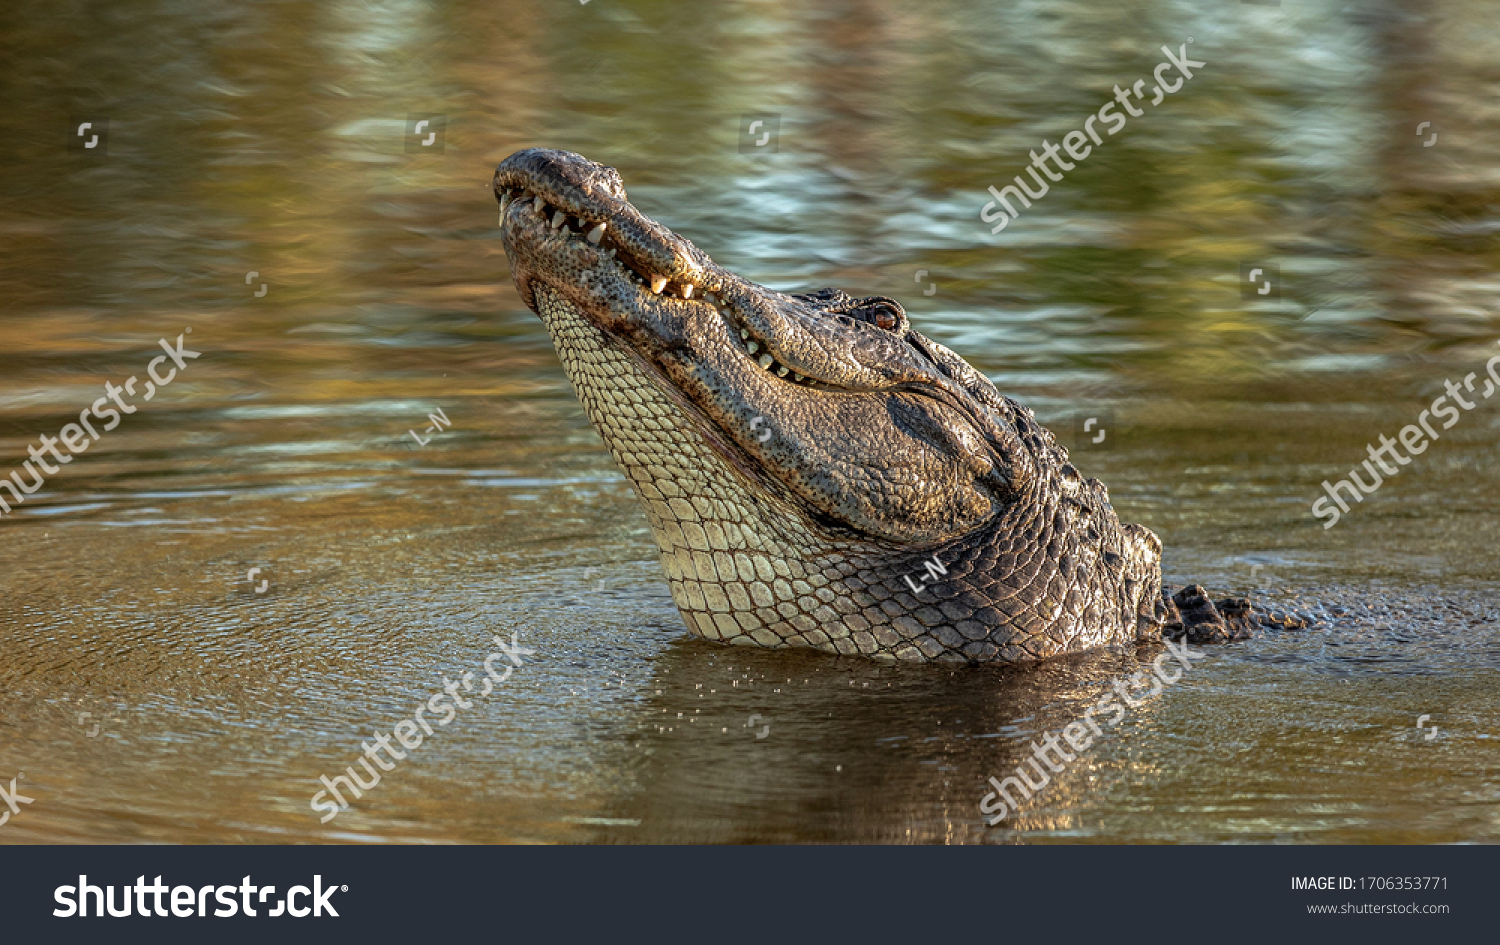 Large crocodile with sharp teeth in the water on the river. #1706353771